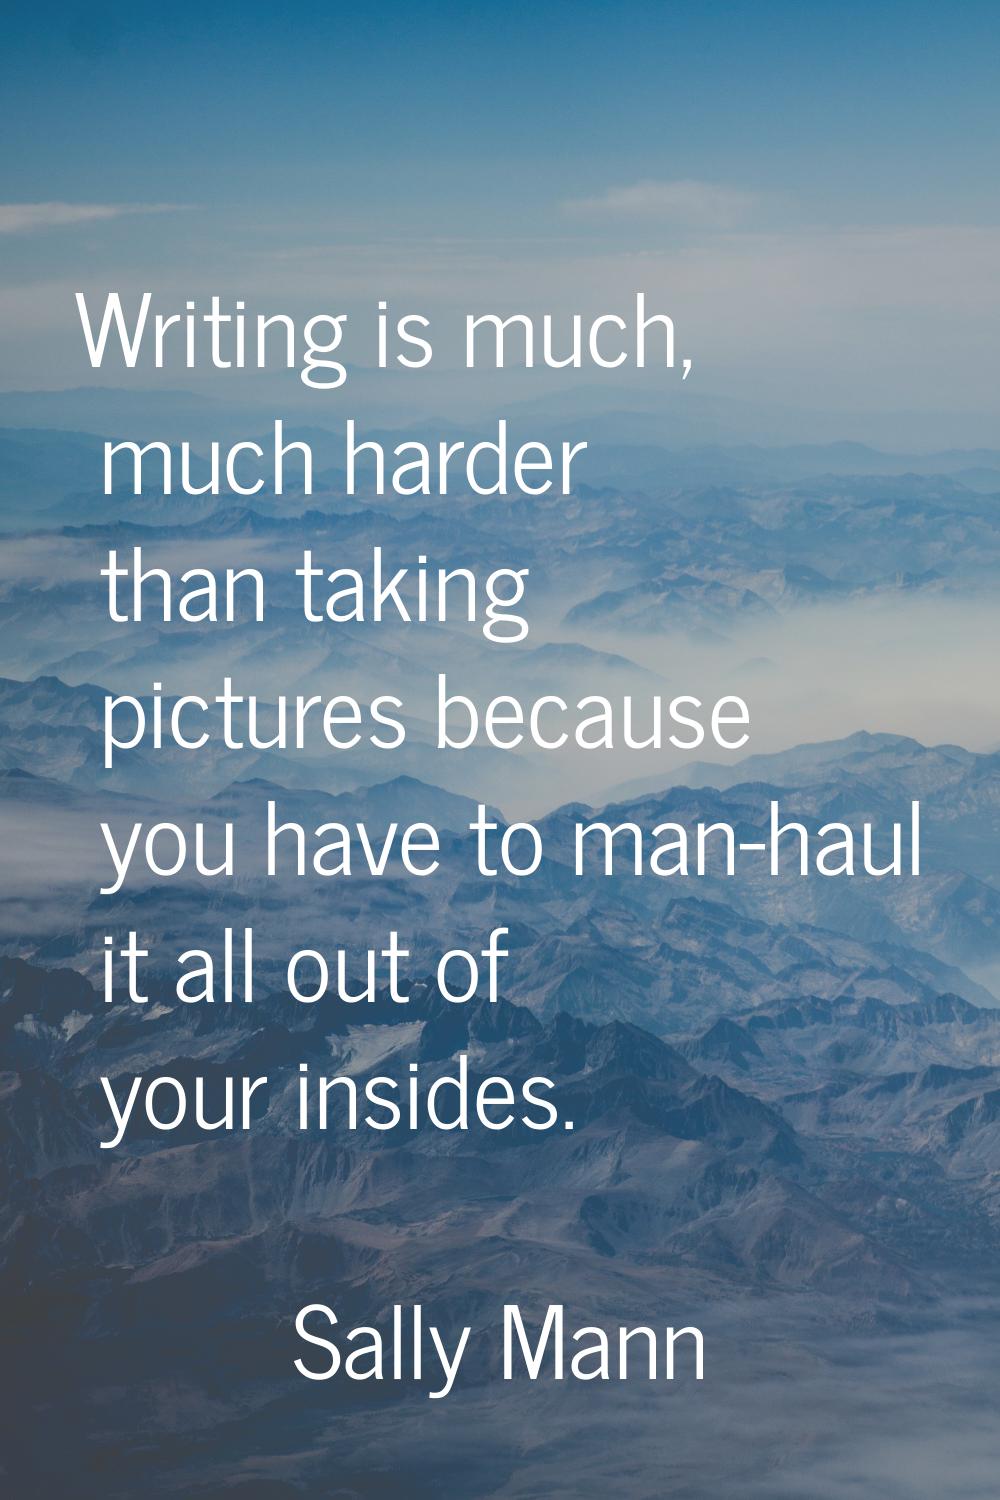 Writing is much, much harder than taking pictures because you have to man-haul it all out of your i